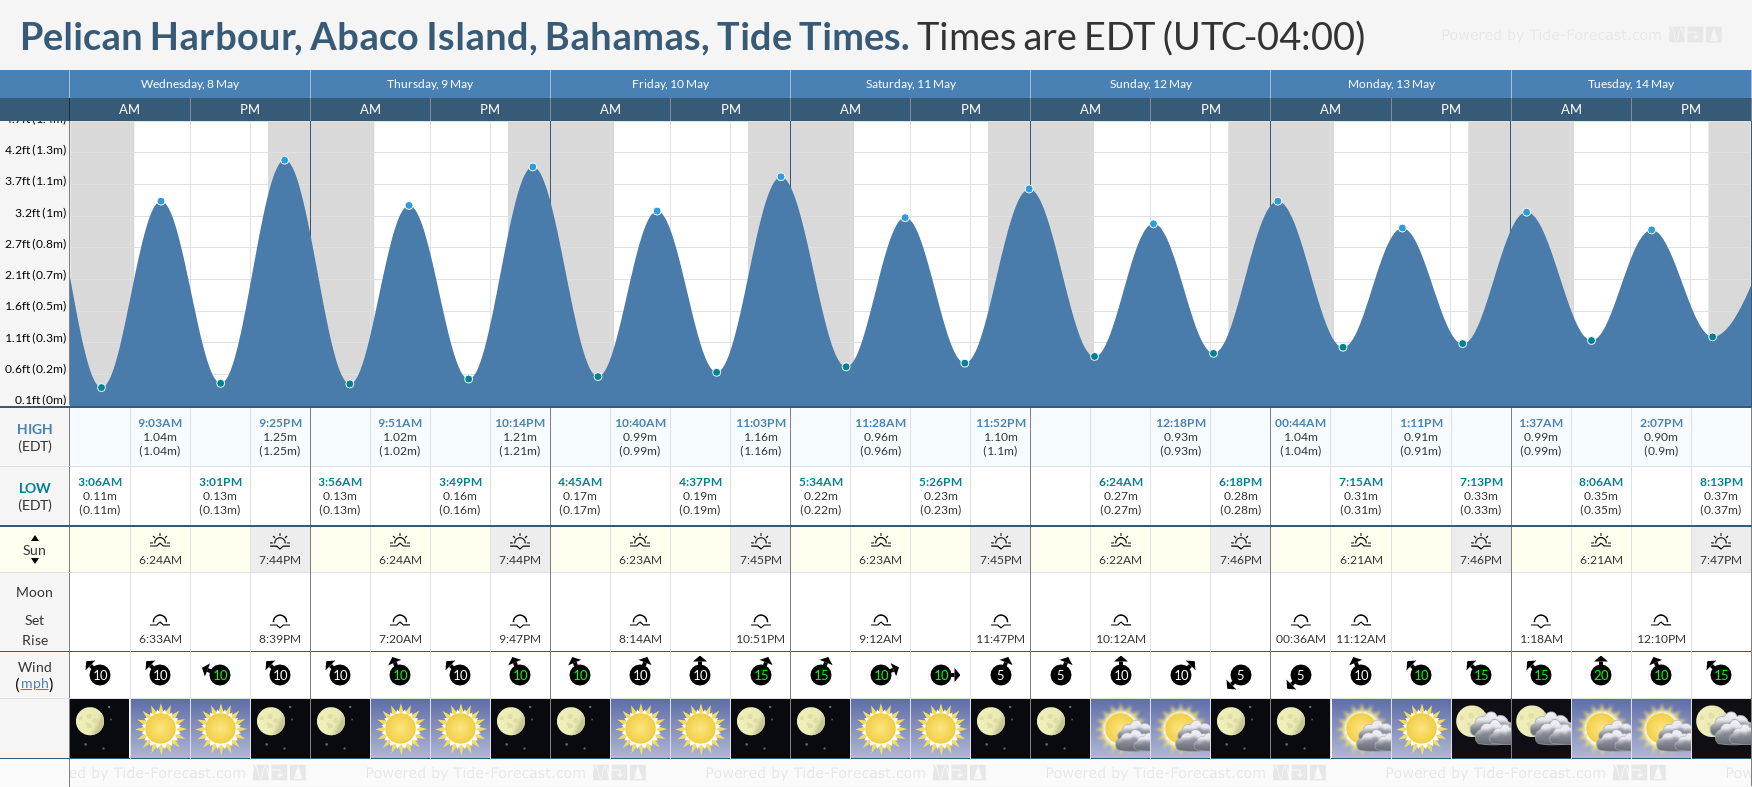 Pelican Harbour, Abaco Island, Bahamas Tide Chart including high and low tide tide times for the next 7 days